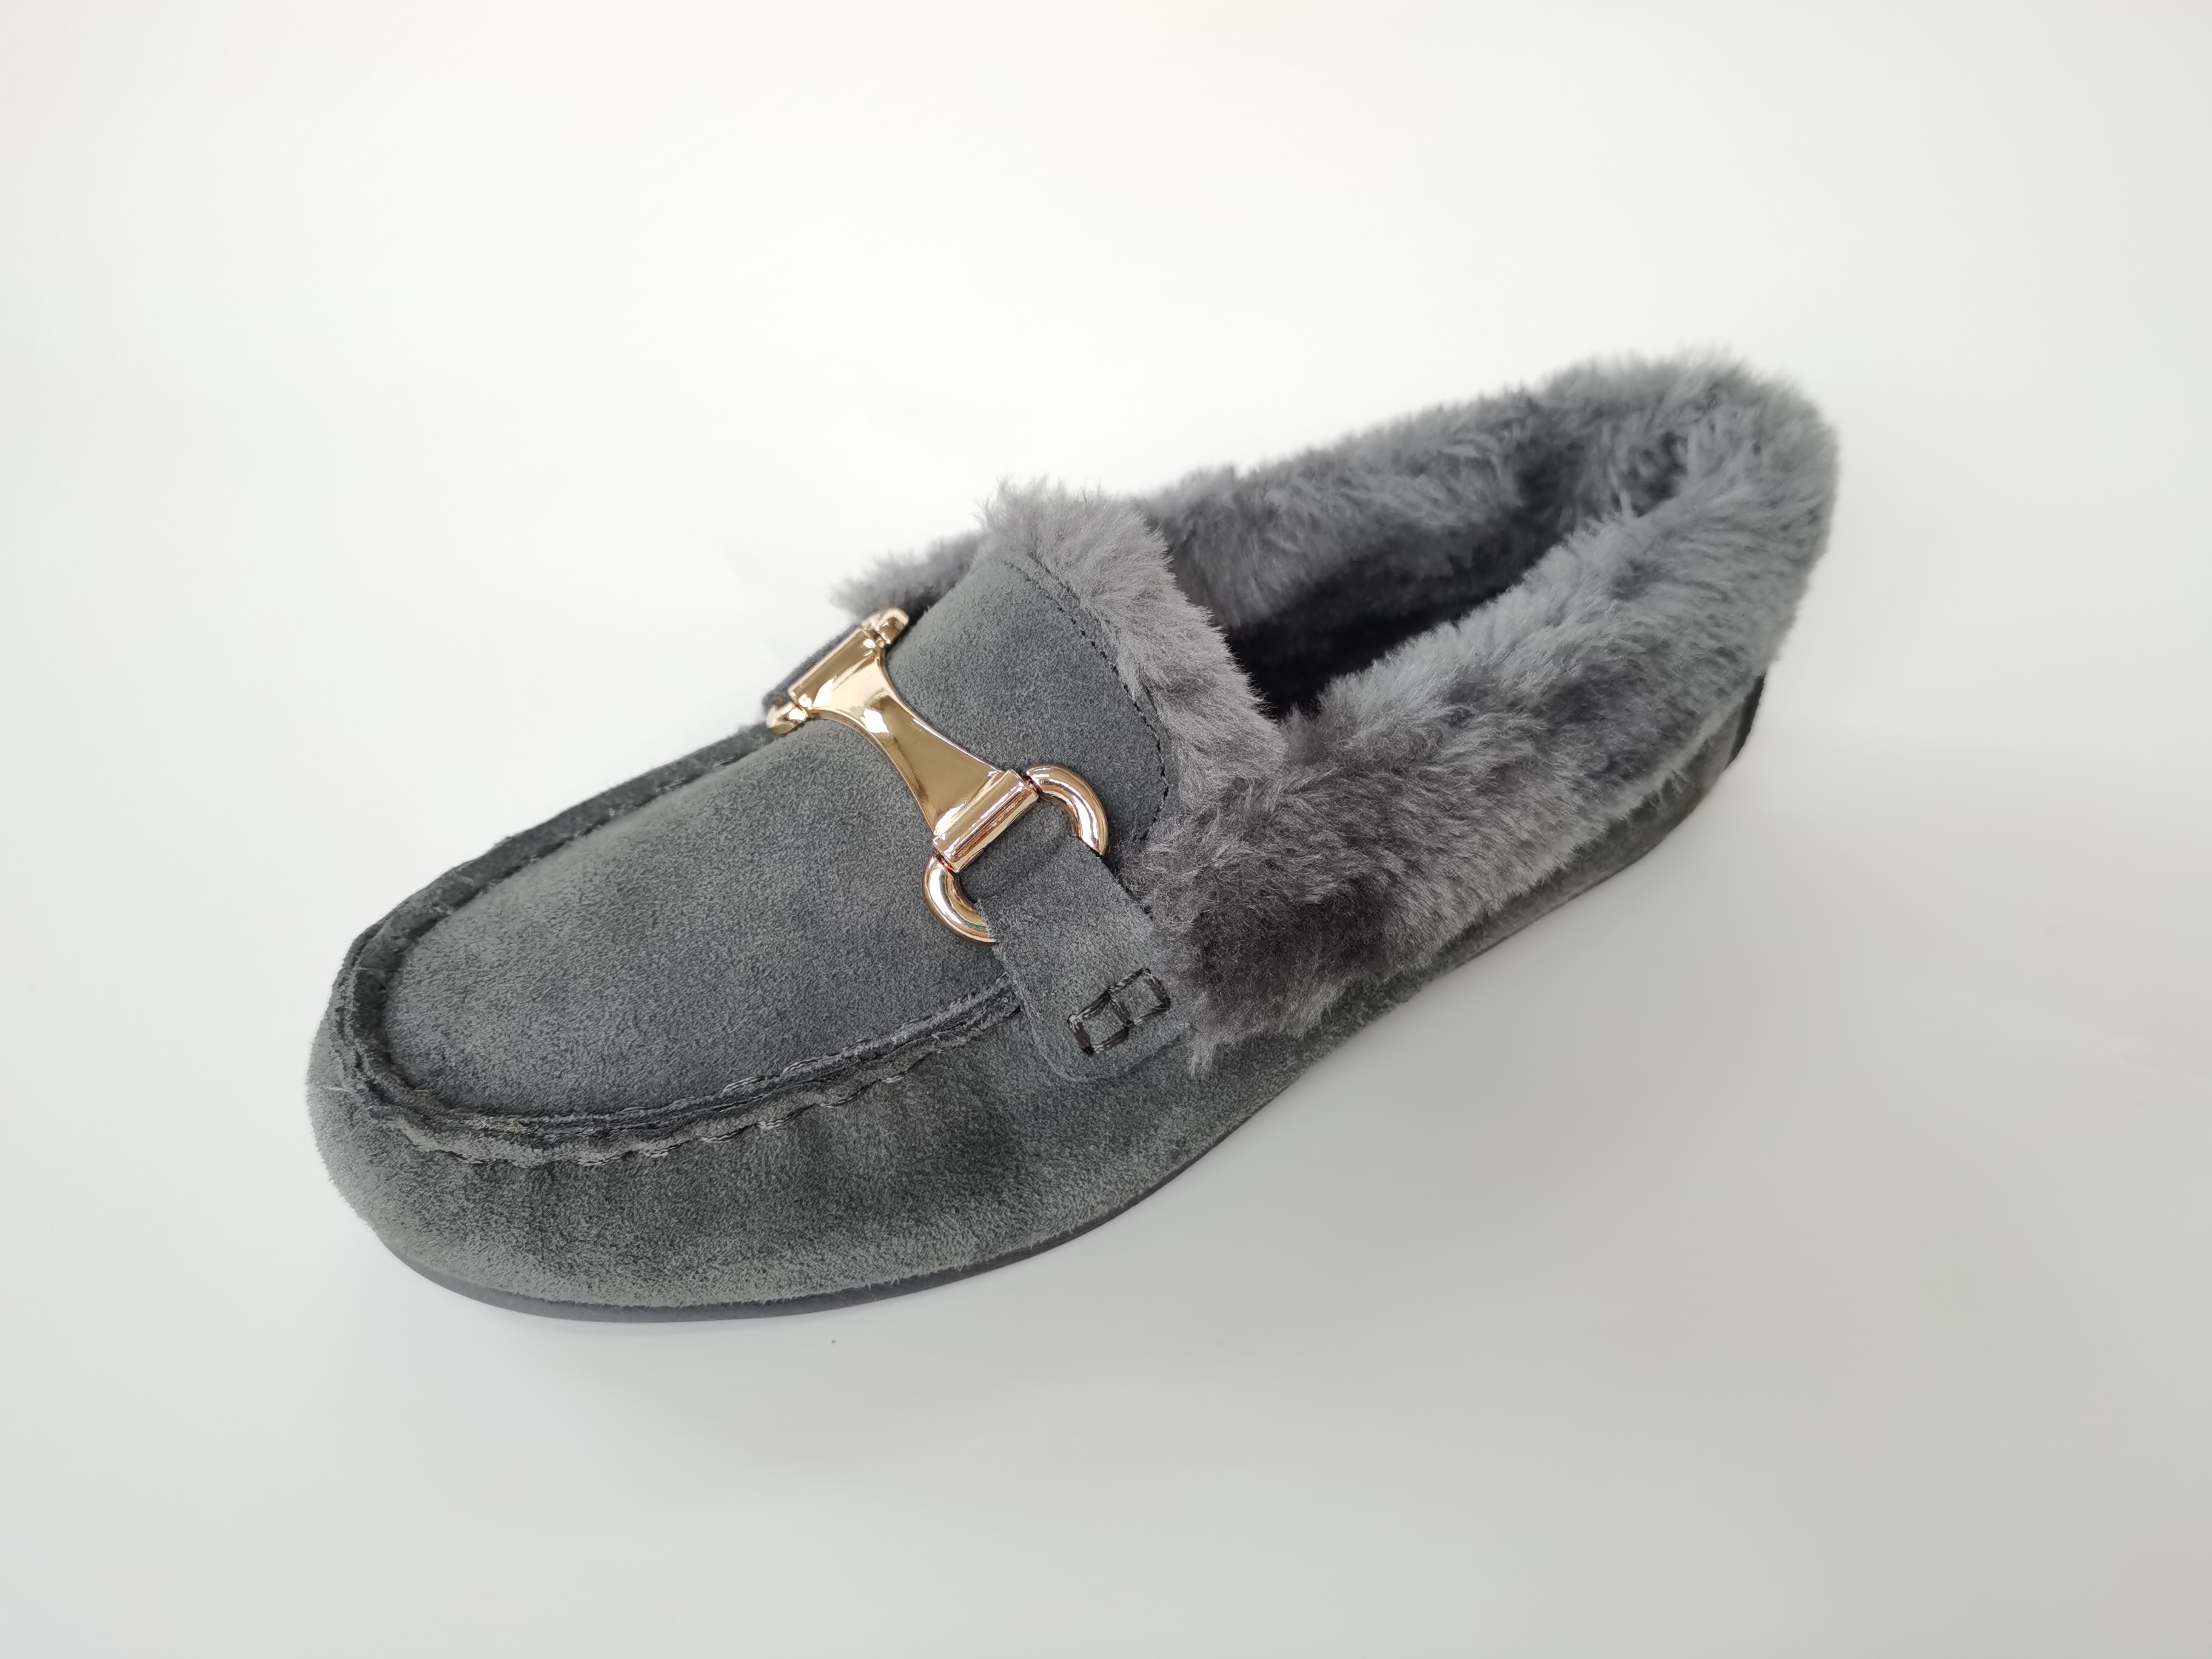 Womens Slipper Micro Suede Faux Fur Lined Indoor & Outdoor Moccasins Slip On